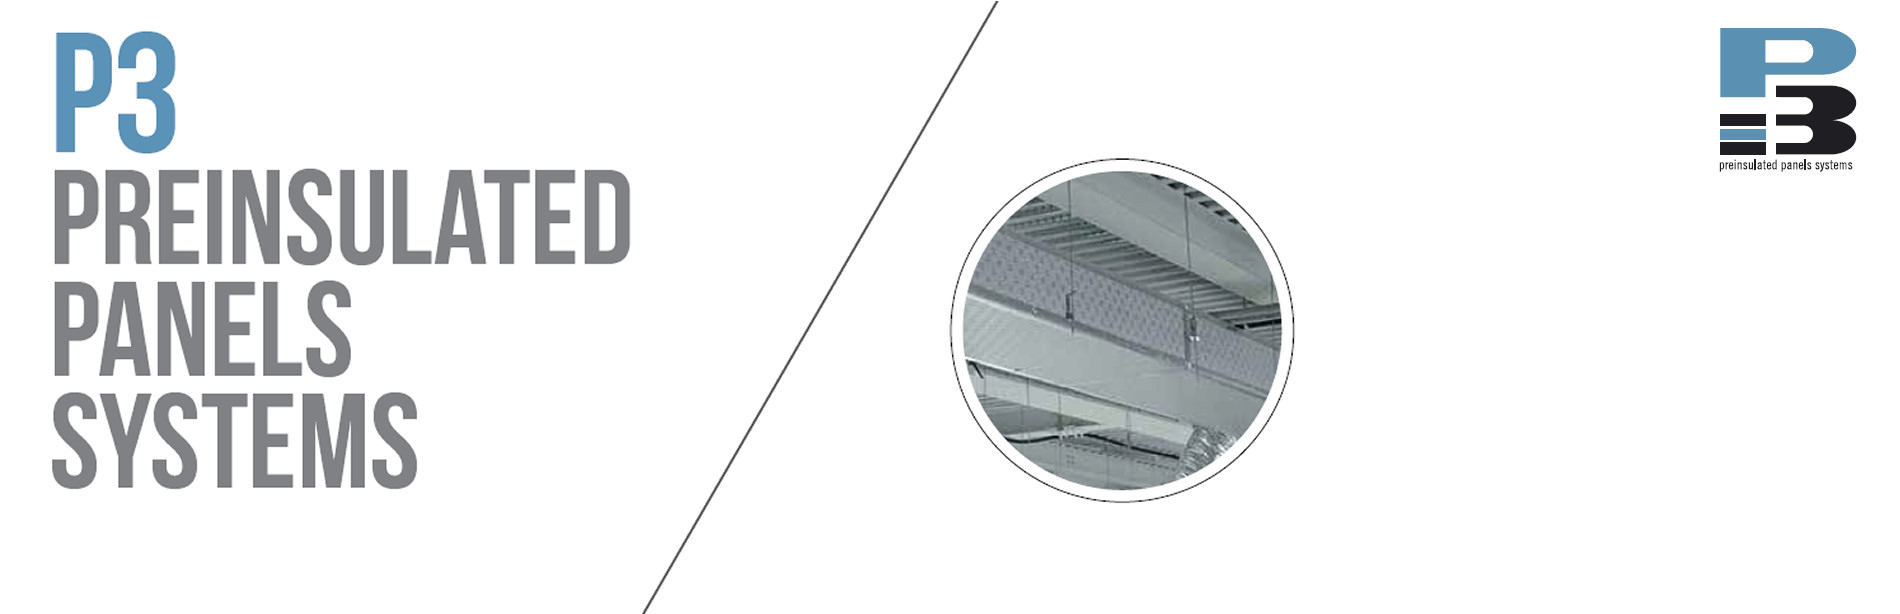 P3 PREINSULATED PANELS SYSTEMS